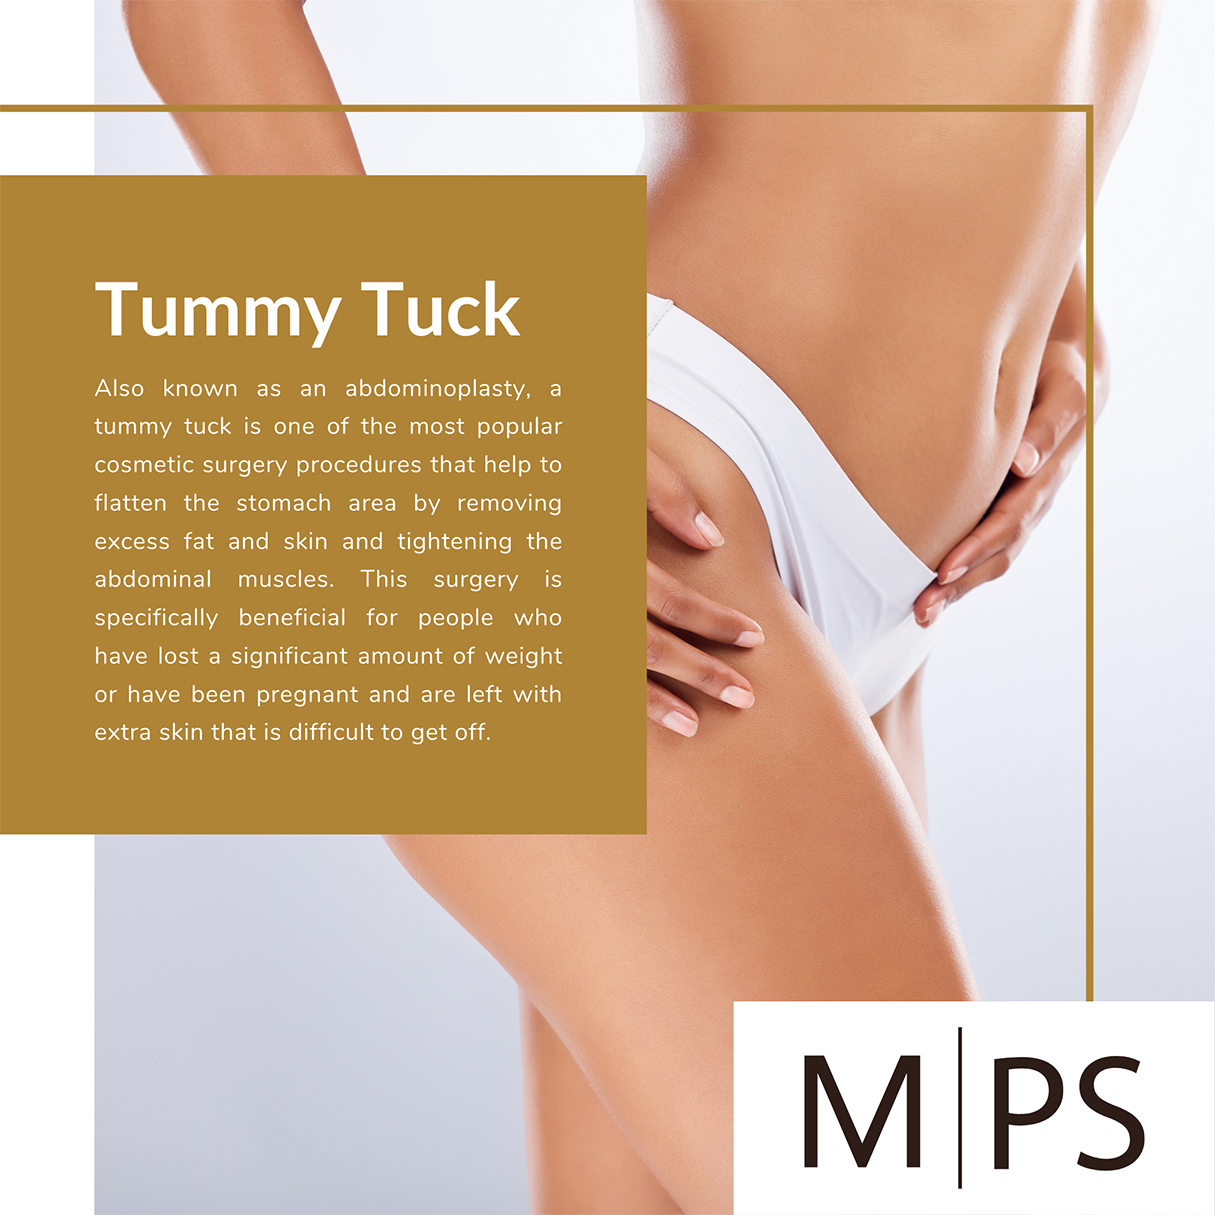 Tummy Tuck Recovery Timeline Darien, CT